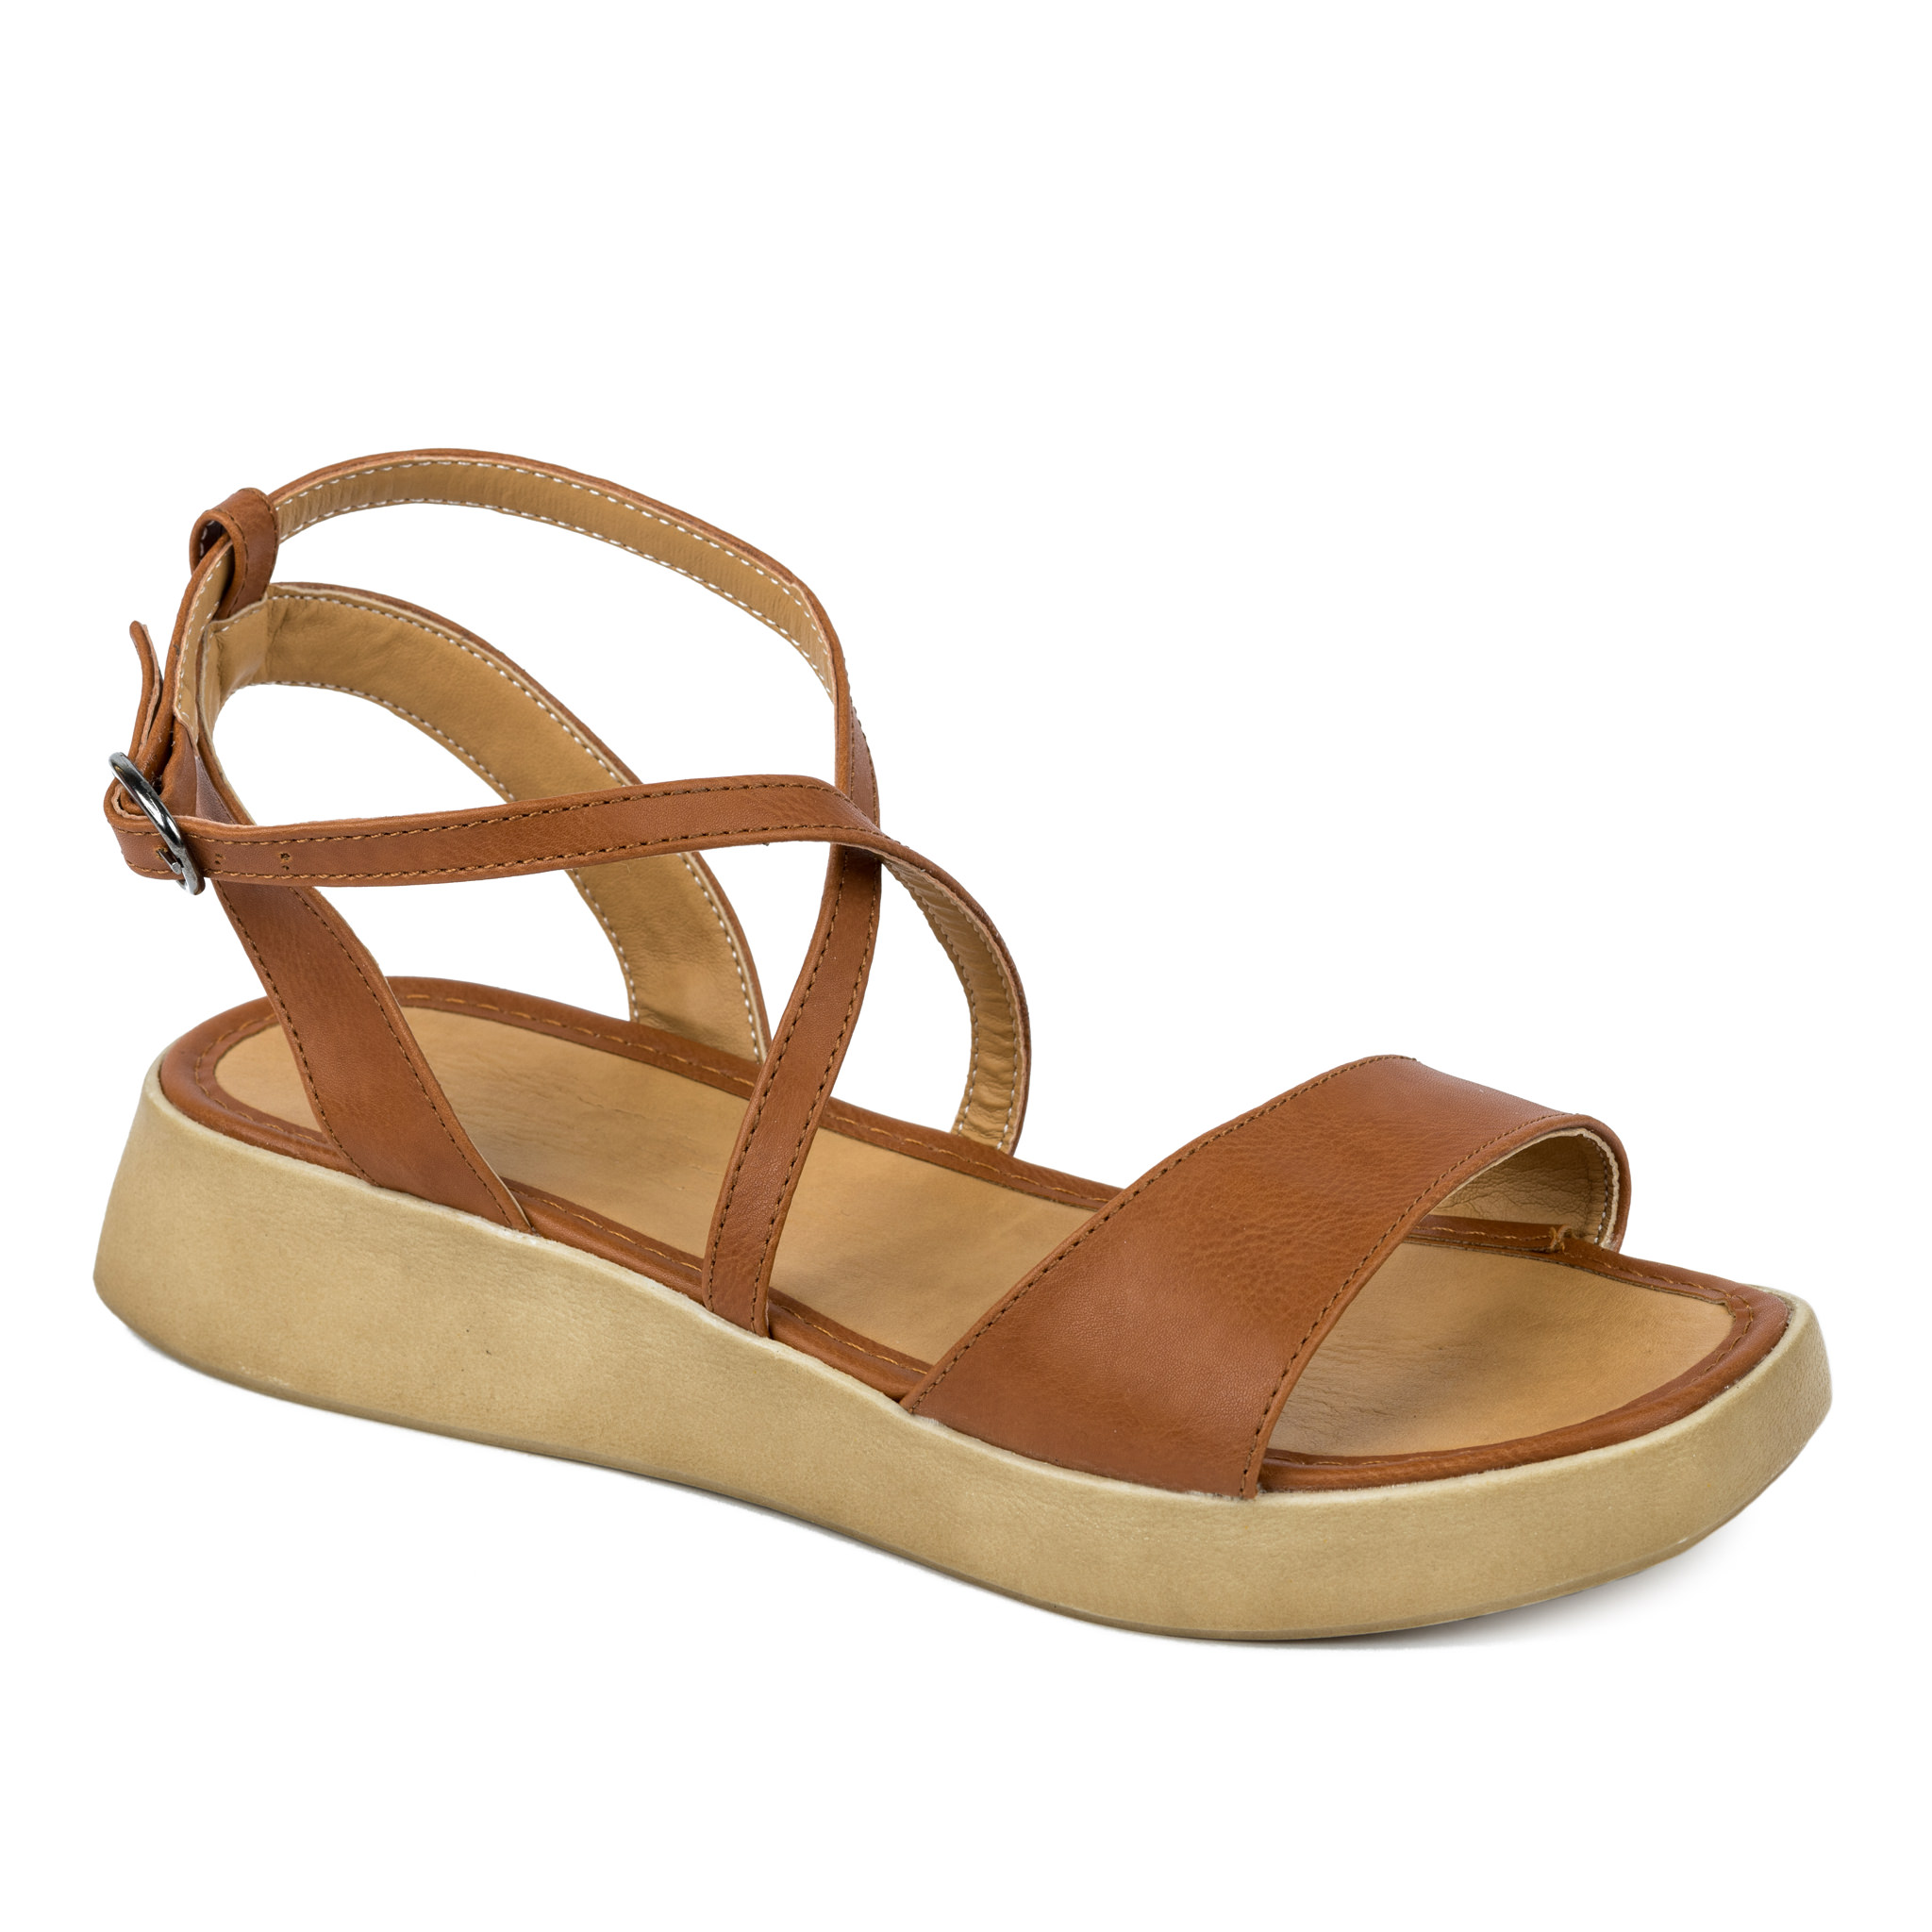 HIGH SOLE SANDALS - CAMEL